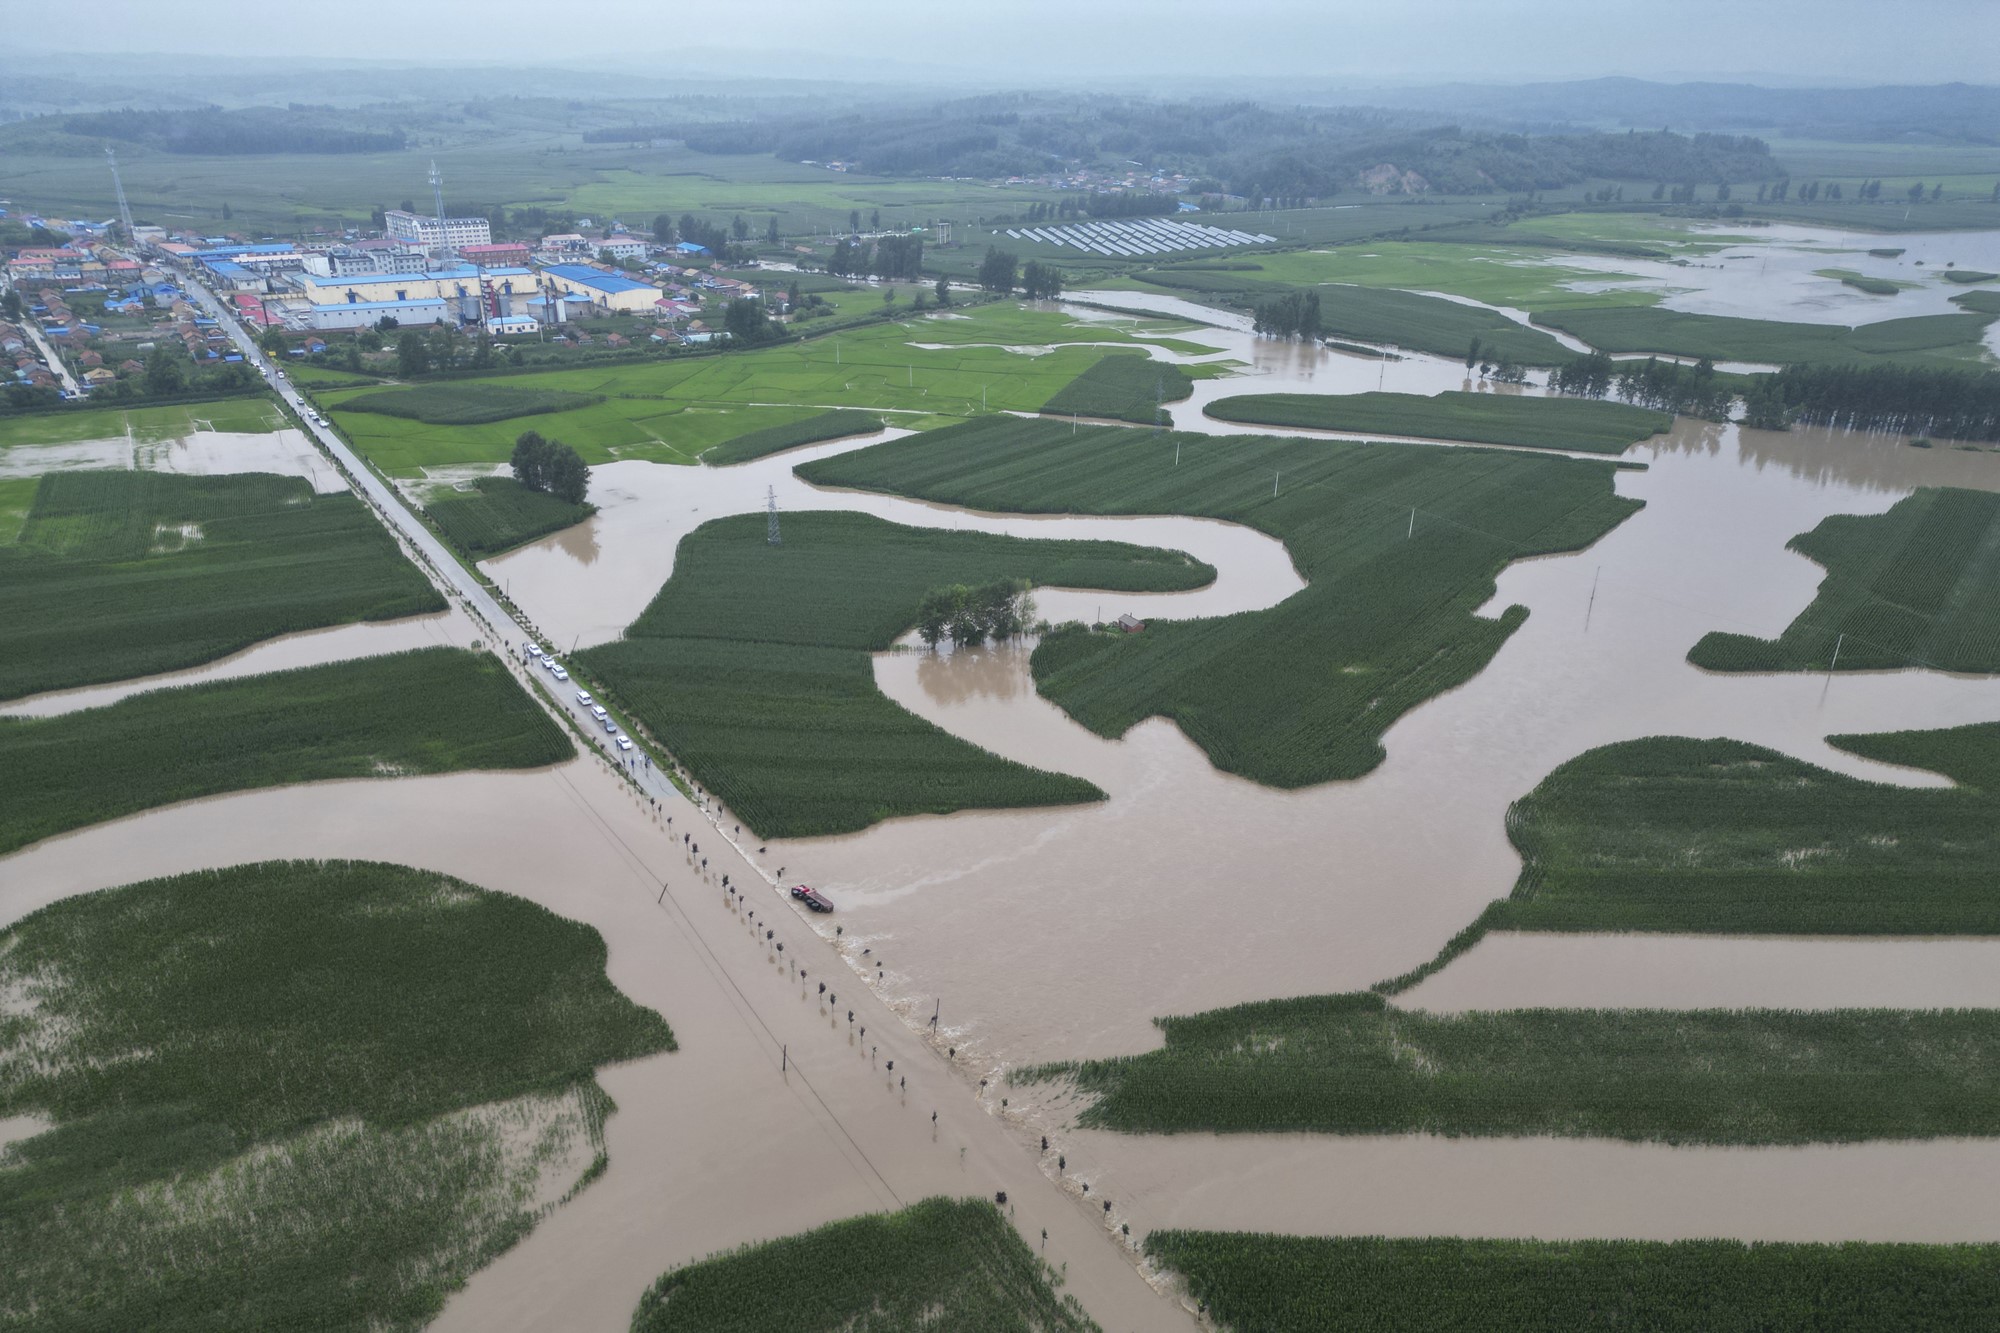 An aerial image of flooding waters over a long road and grassy plains. A town and trees in the background.